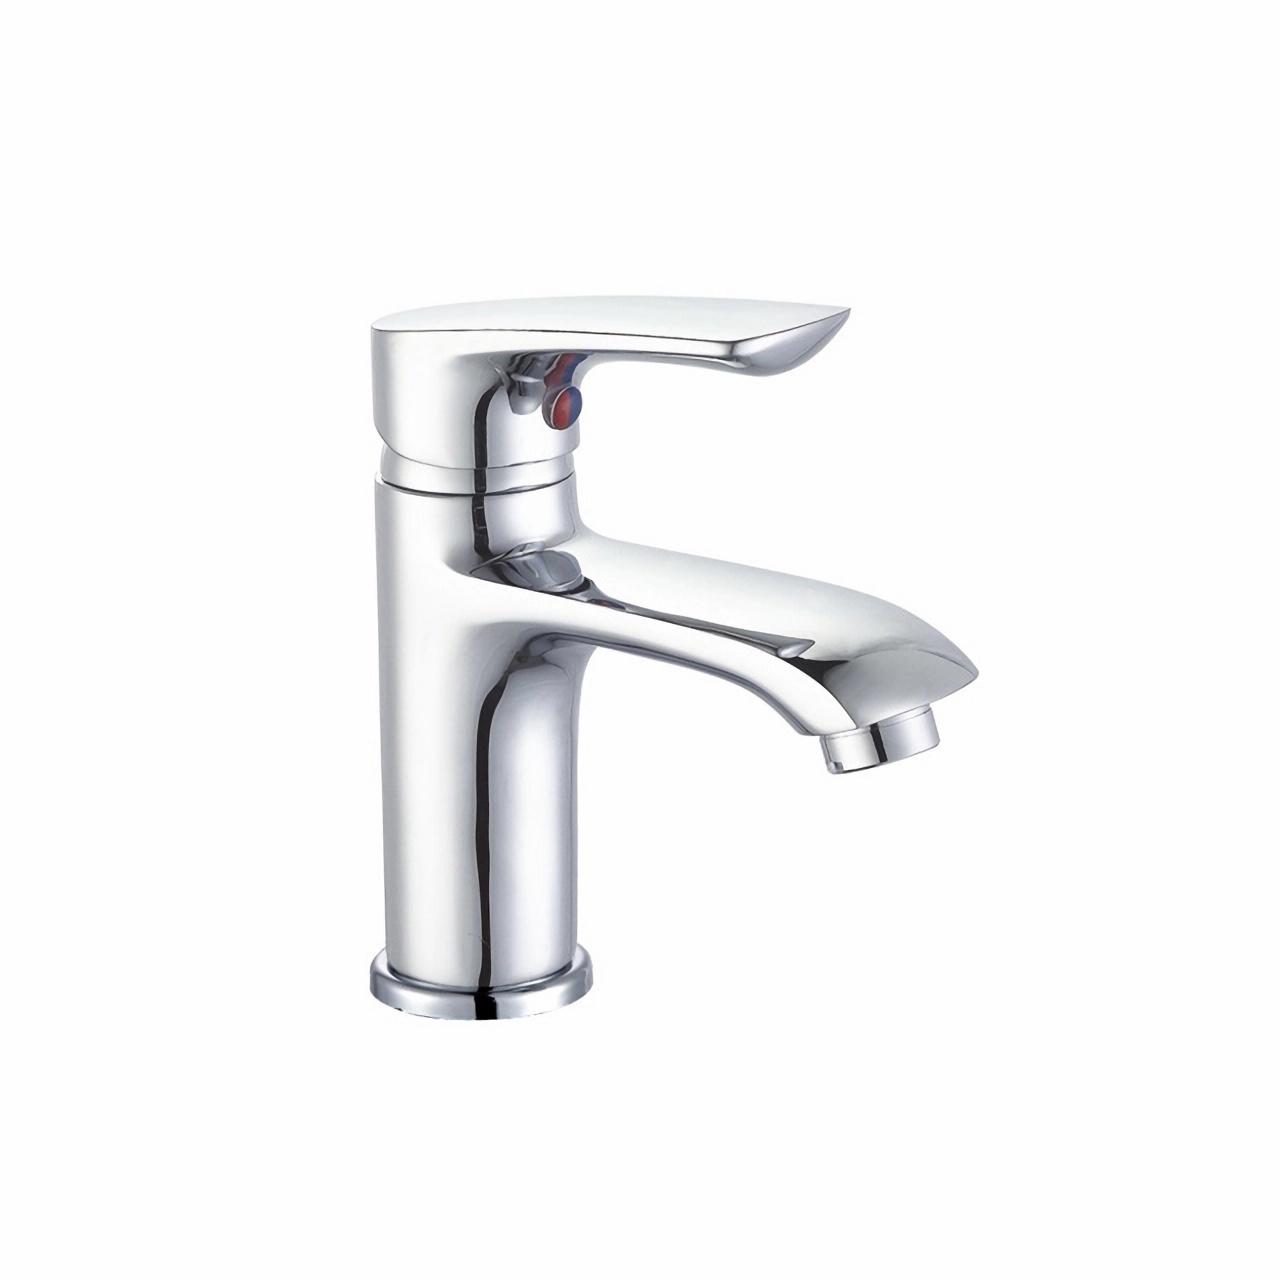 OJ-J0181H Bathroom Sink Cold And Hot Water Mixer Tap Basin Faucet Single Lever Deck Mounted Single Hole One Handle Chrome Brass Basin Faucet